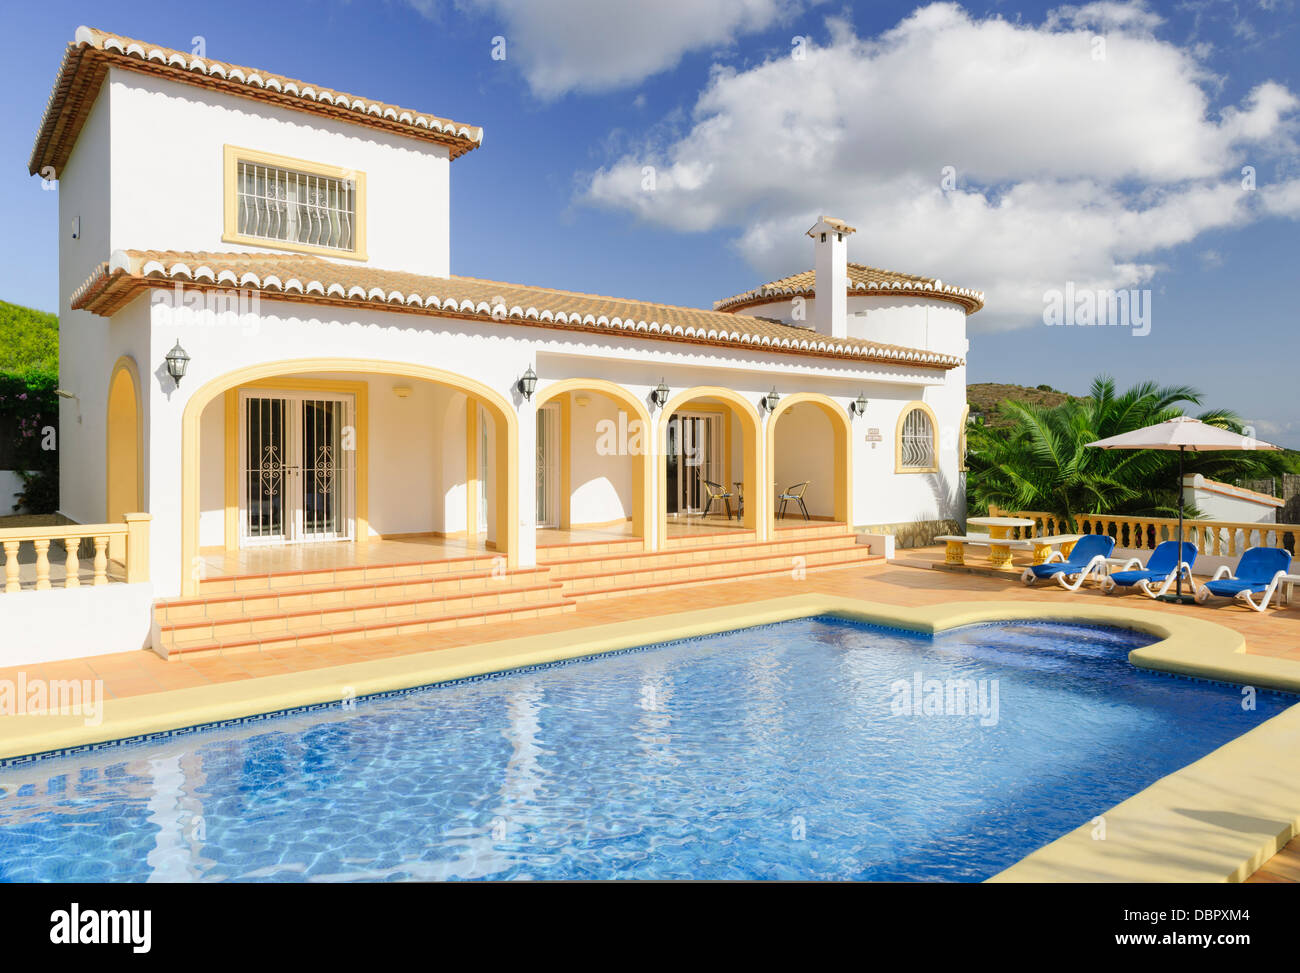 A holiday villa, complete with pool, basks in the Spanish sunshine whilst a series of fluffy white clouds pass by overhead. Stock Photo